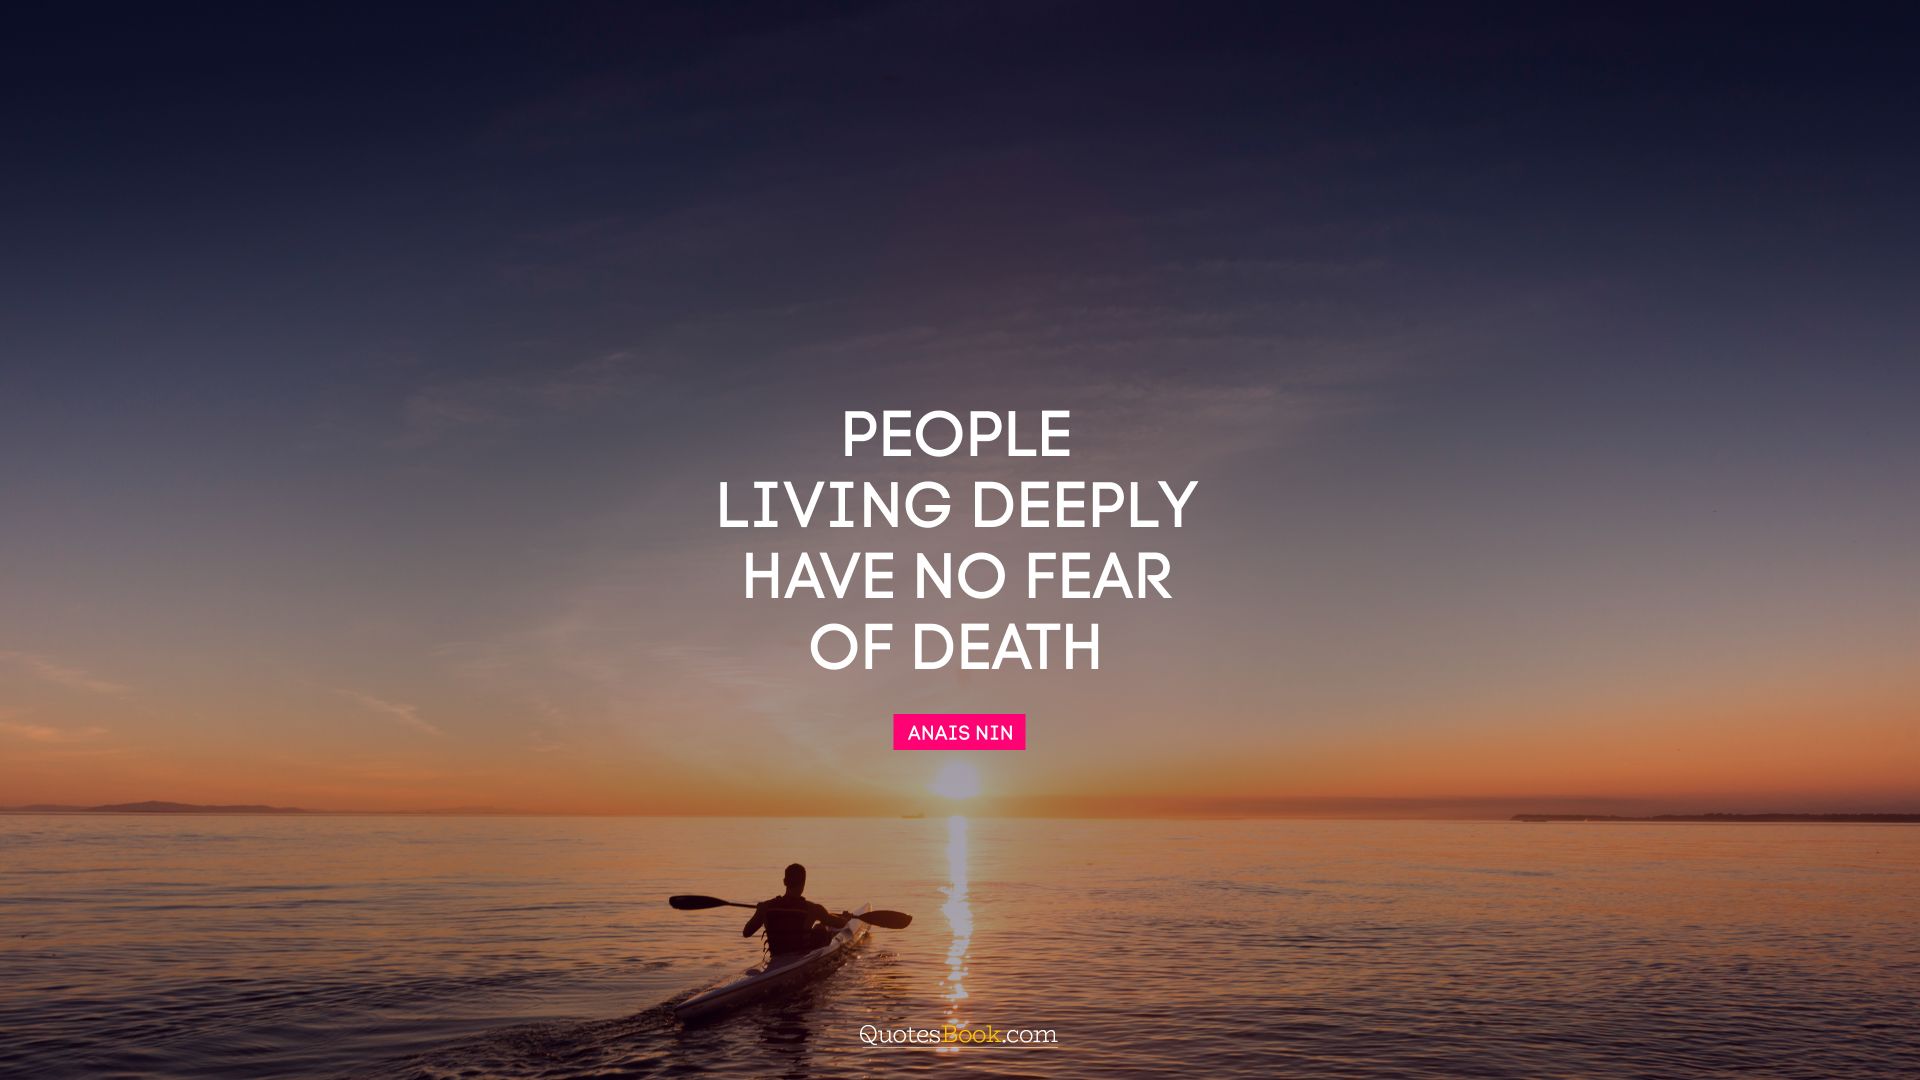 People living deeply have no fear of death. - Quote by Anais Nin